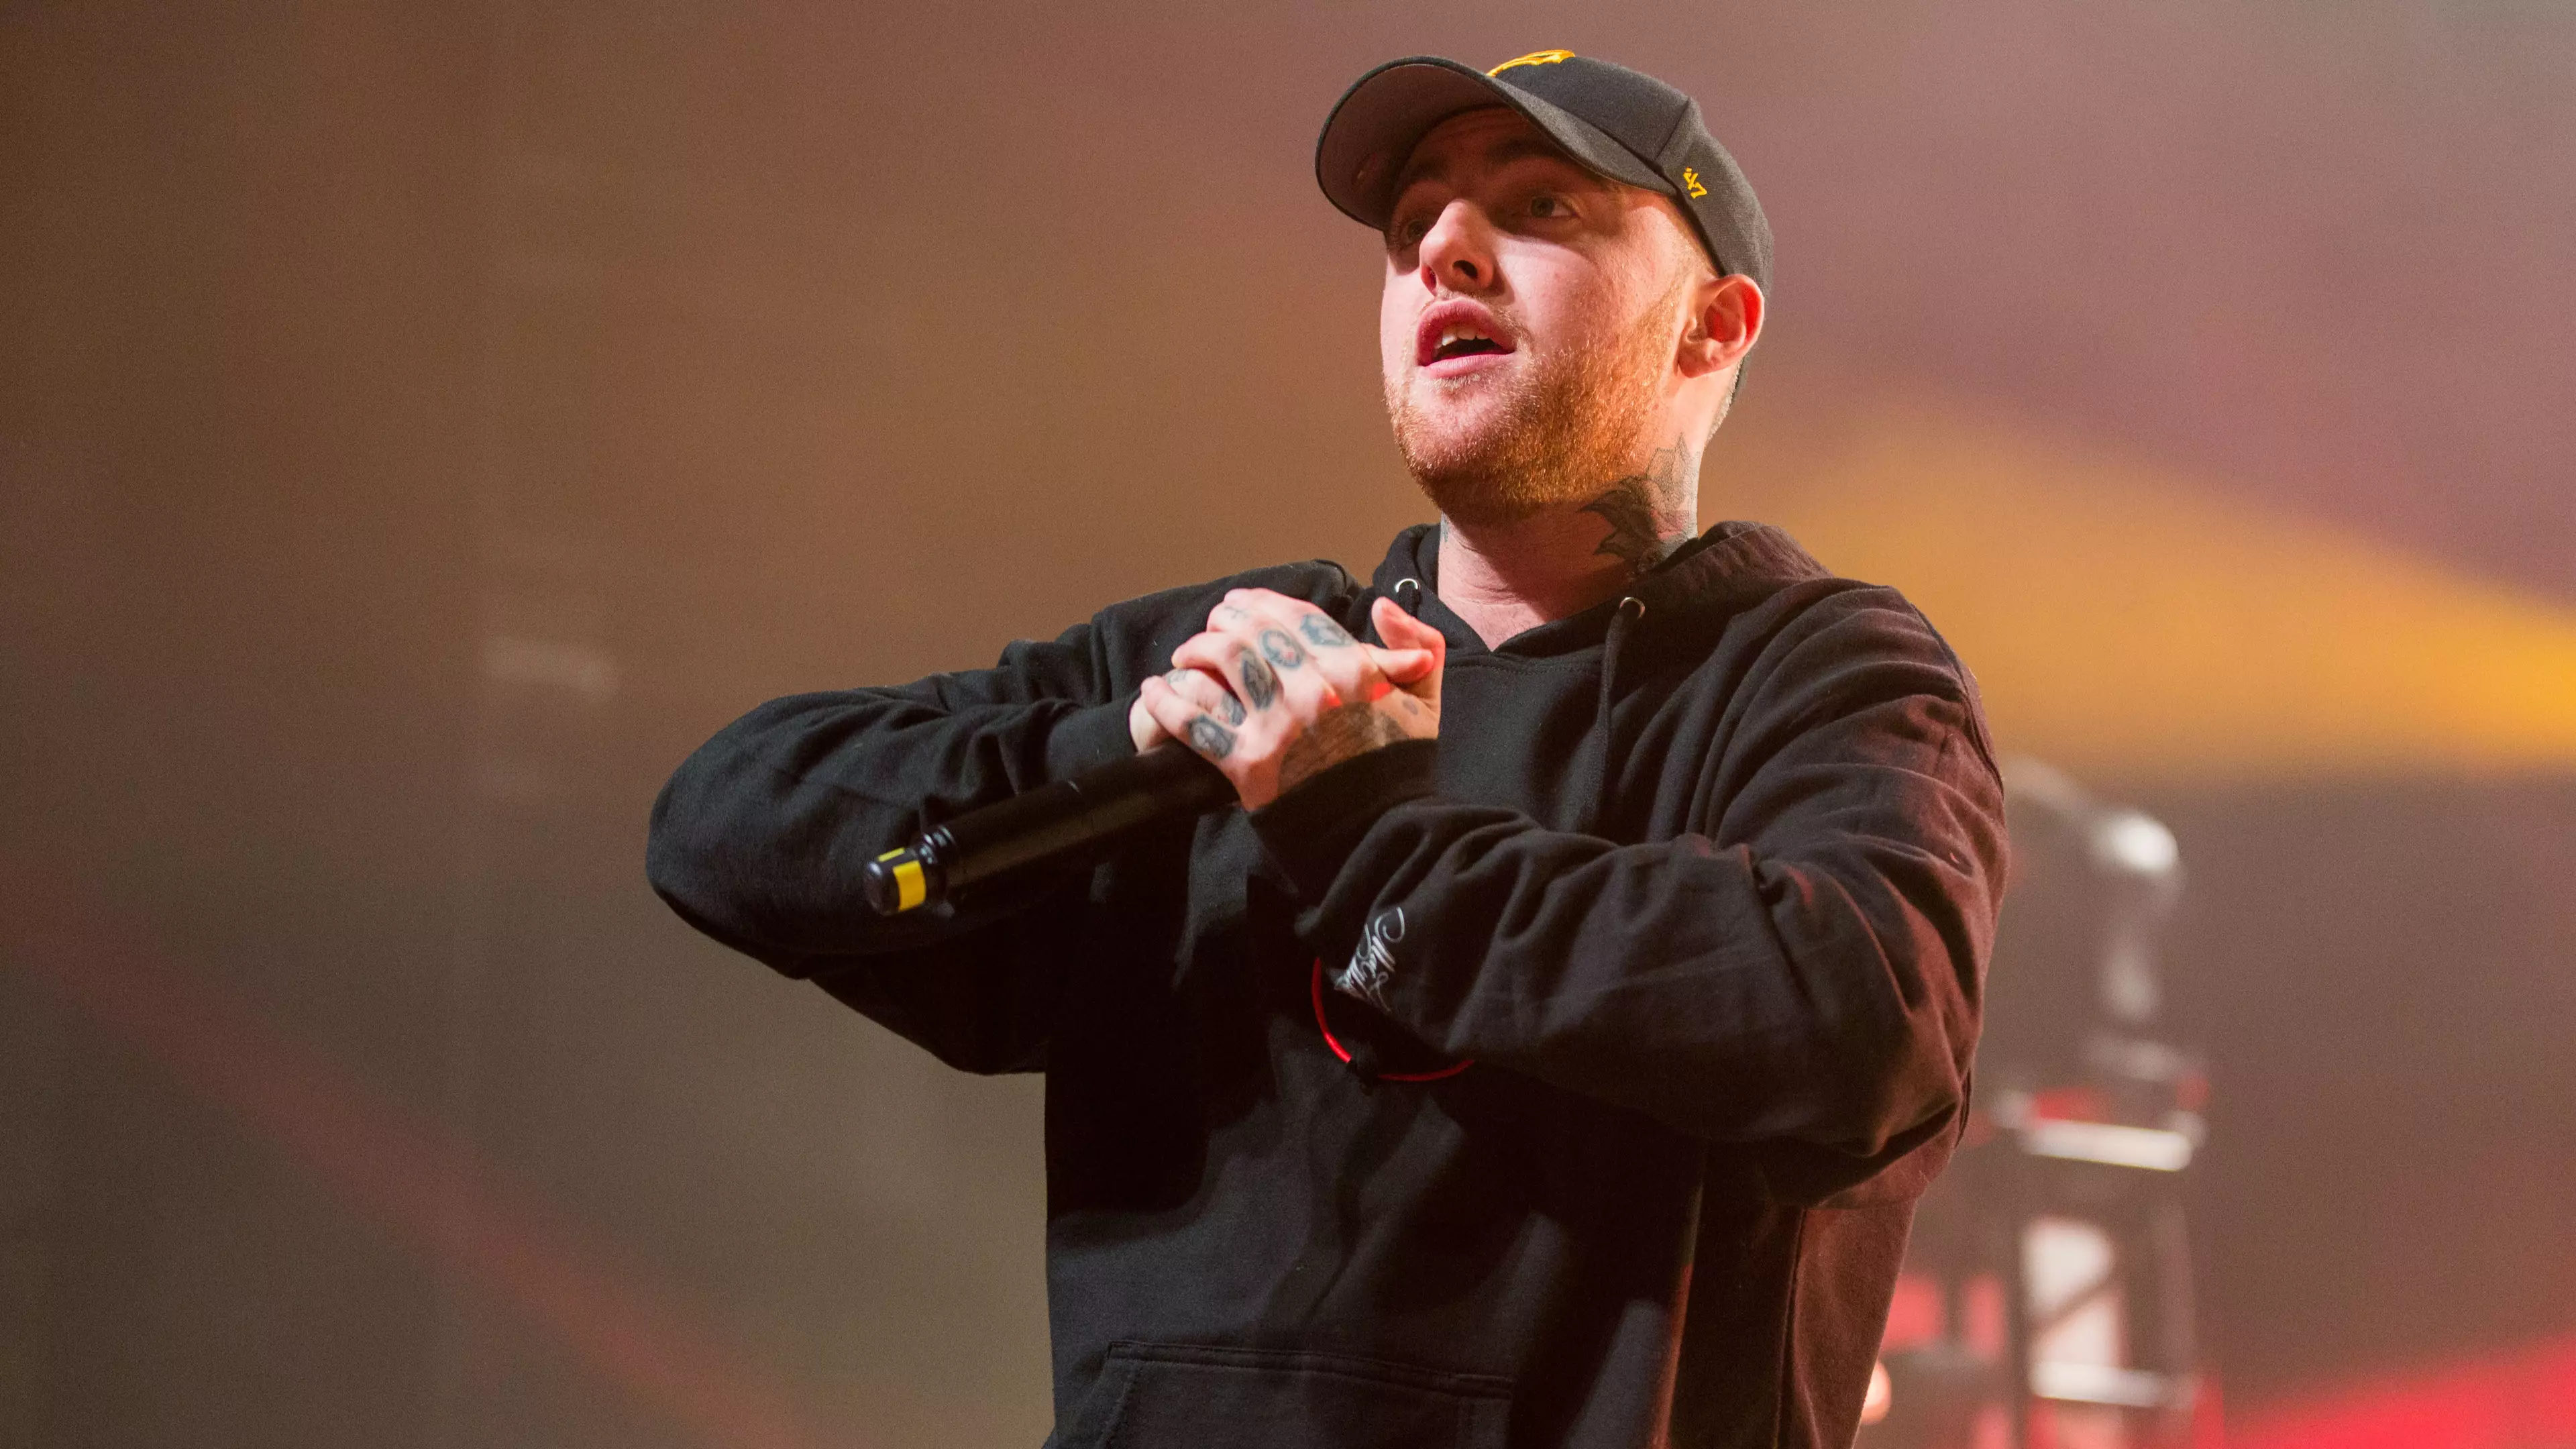 Mac Miller's Posthumous Album Circles Will Be Released On 17 January